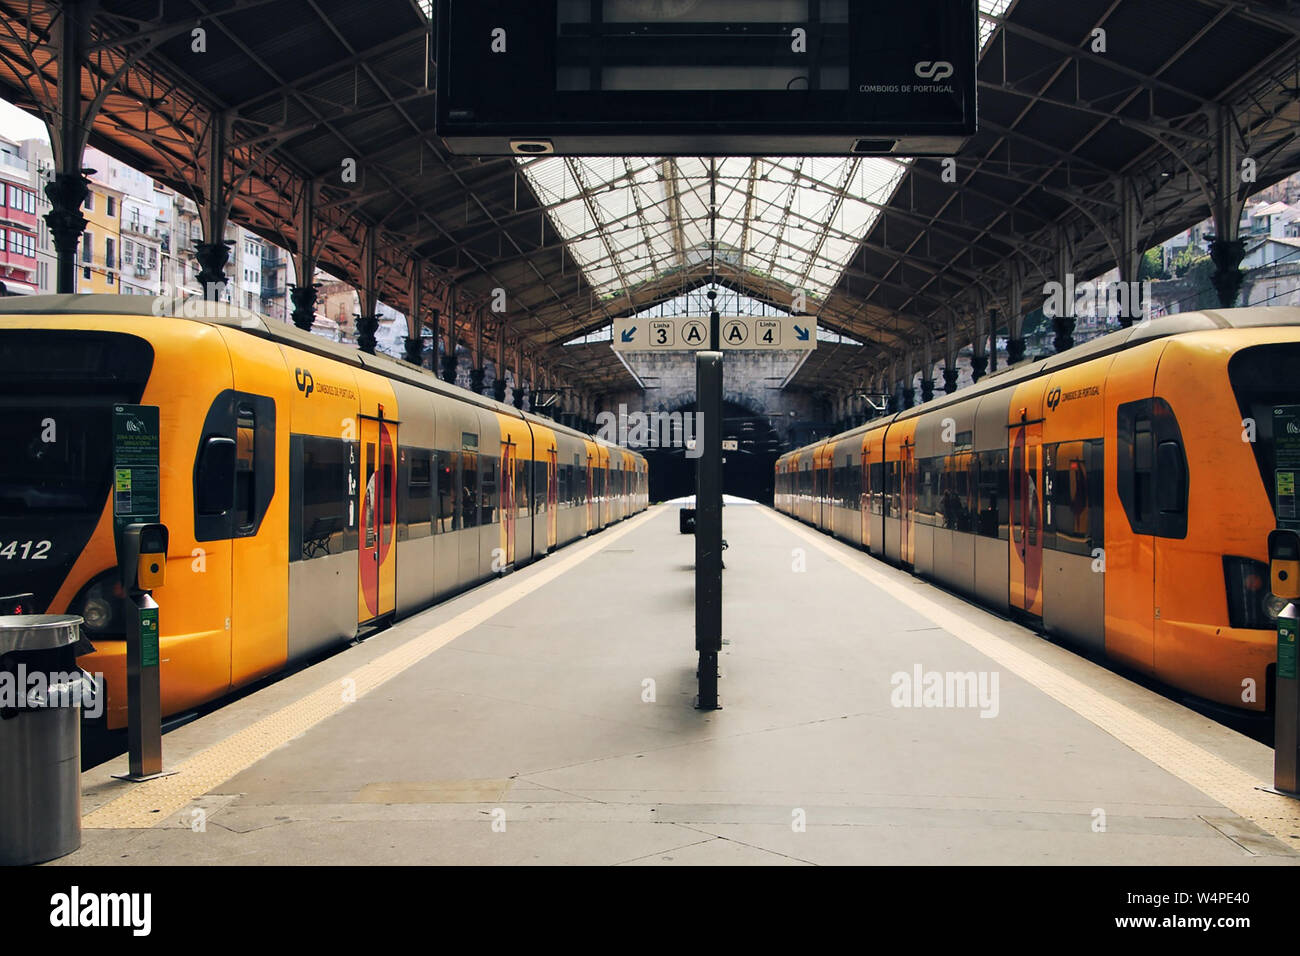 Train station with two yellow trains. Stock Photo